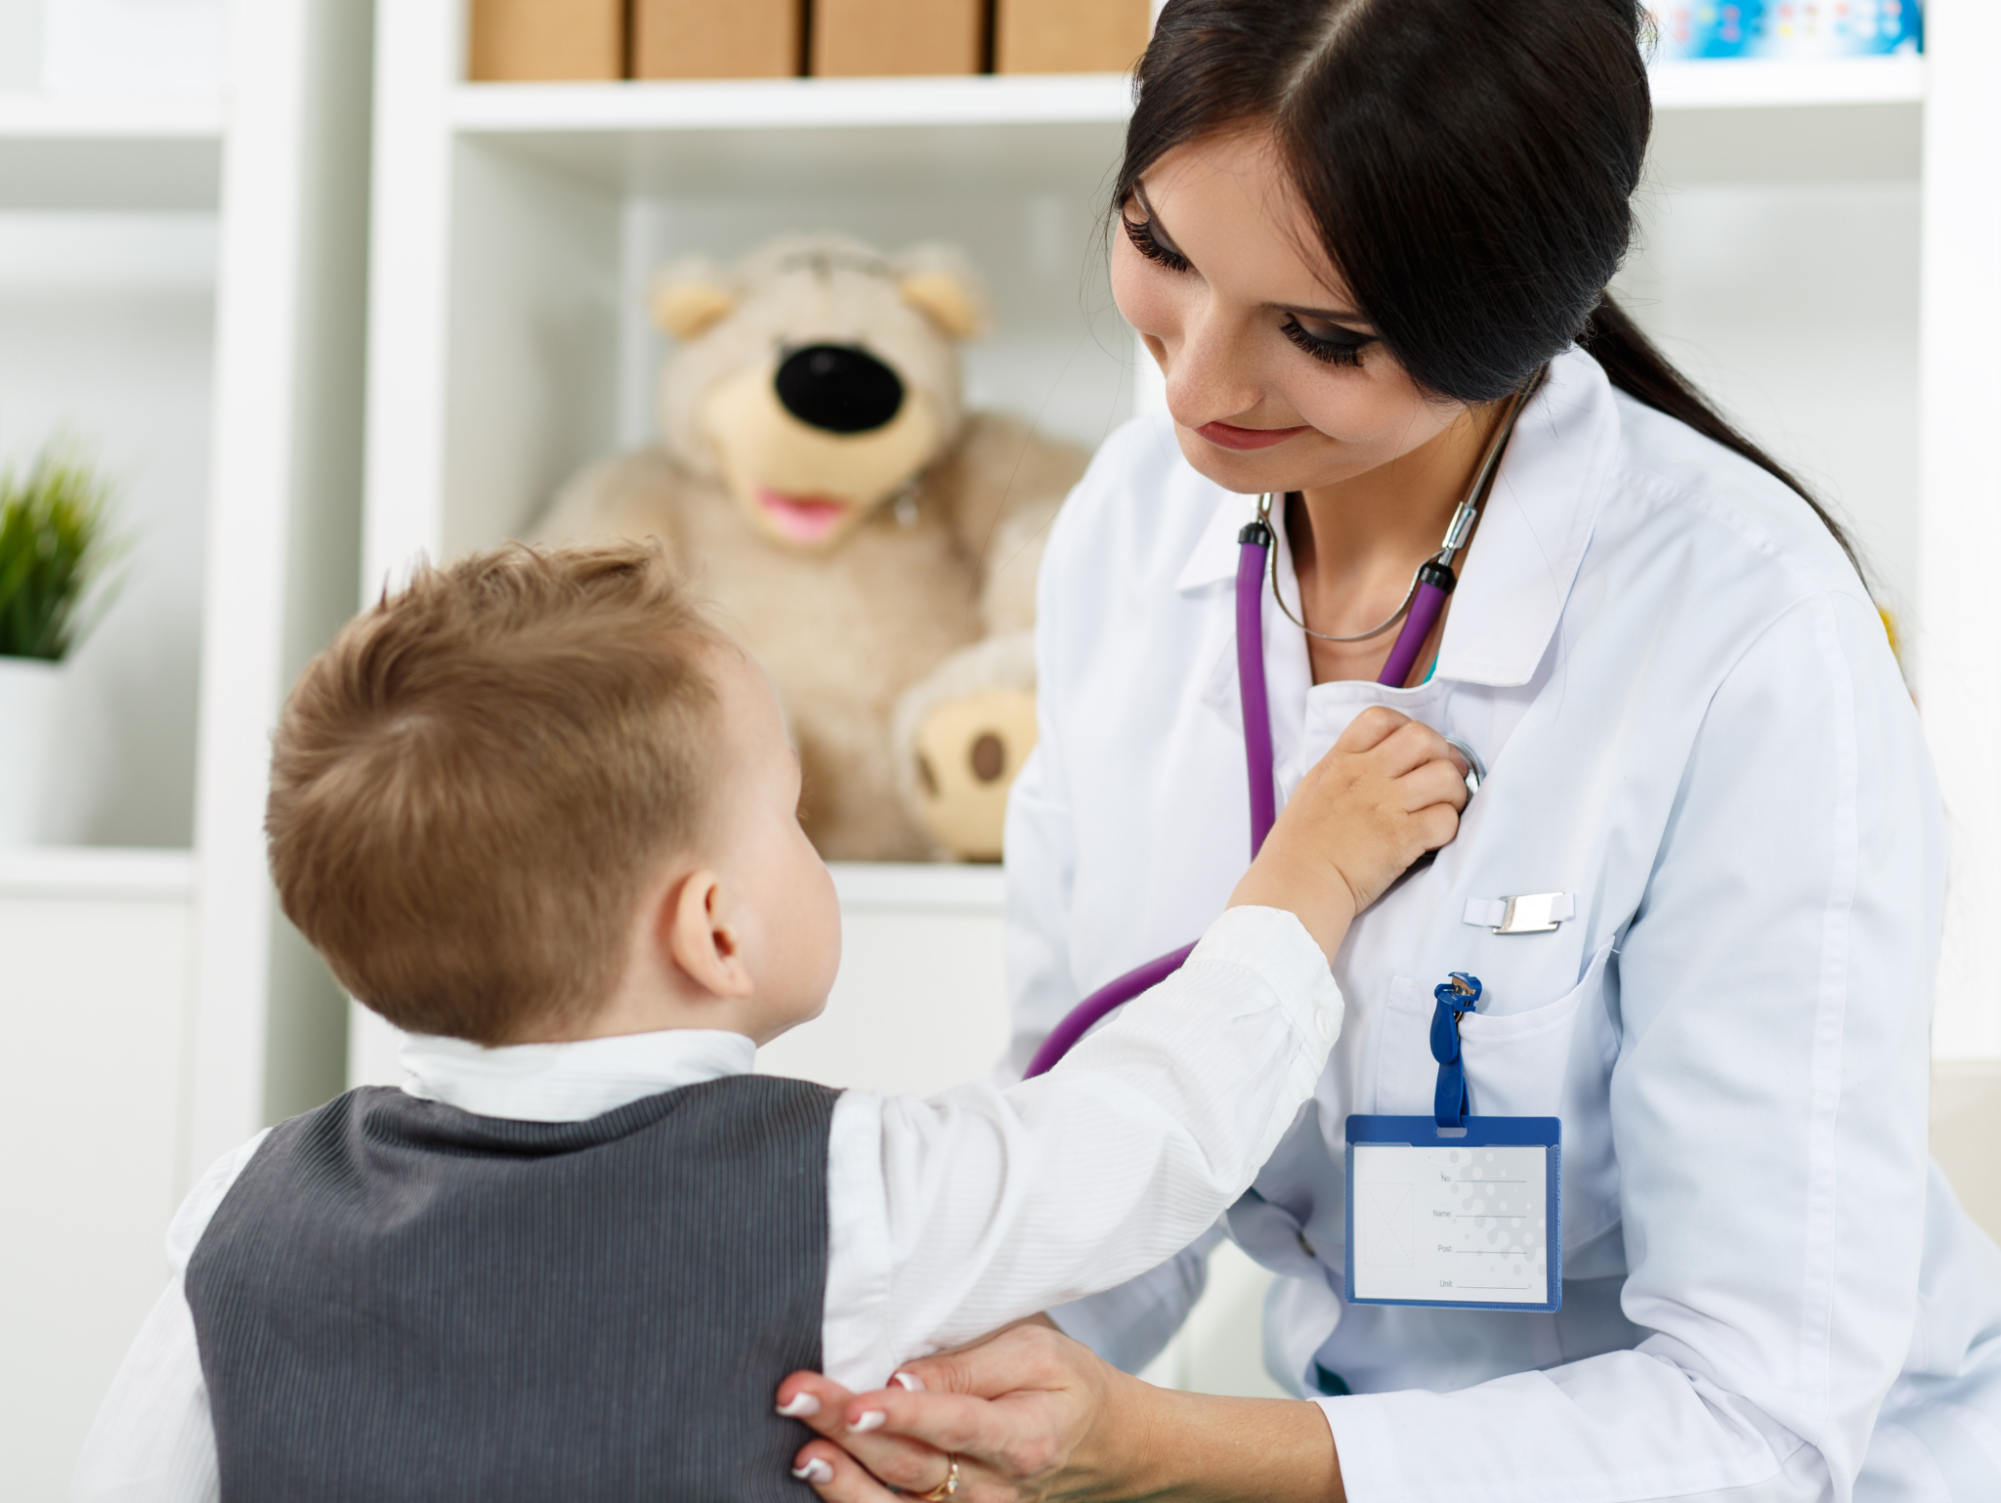 Poll: Voters want candidates to address children’s health issues